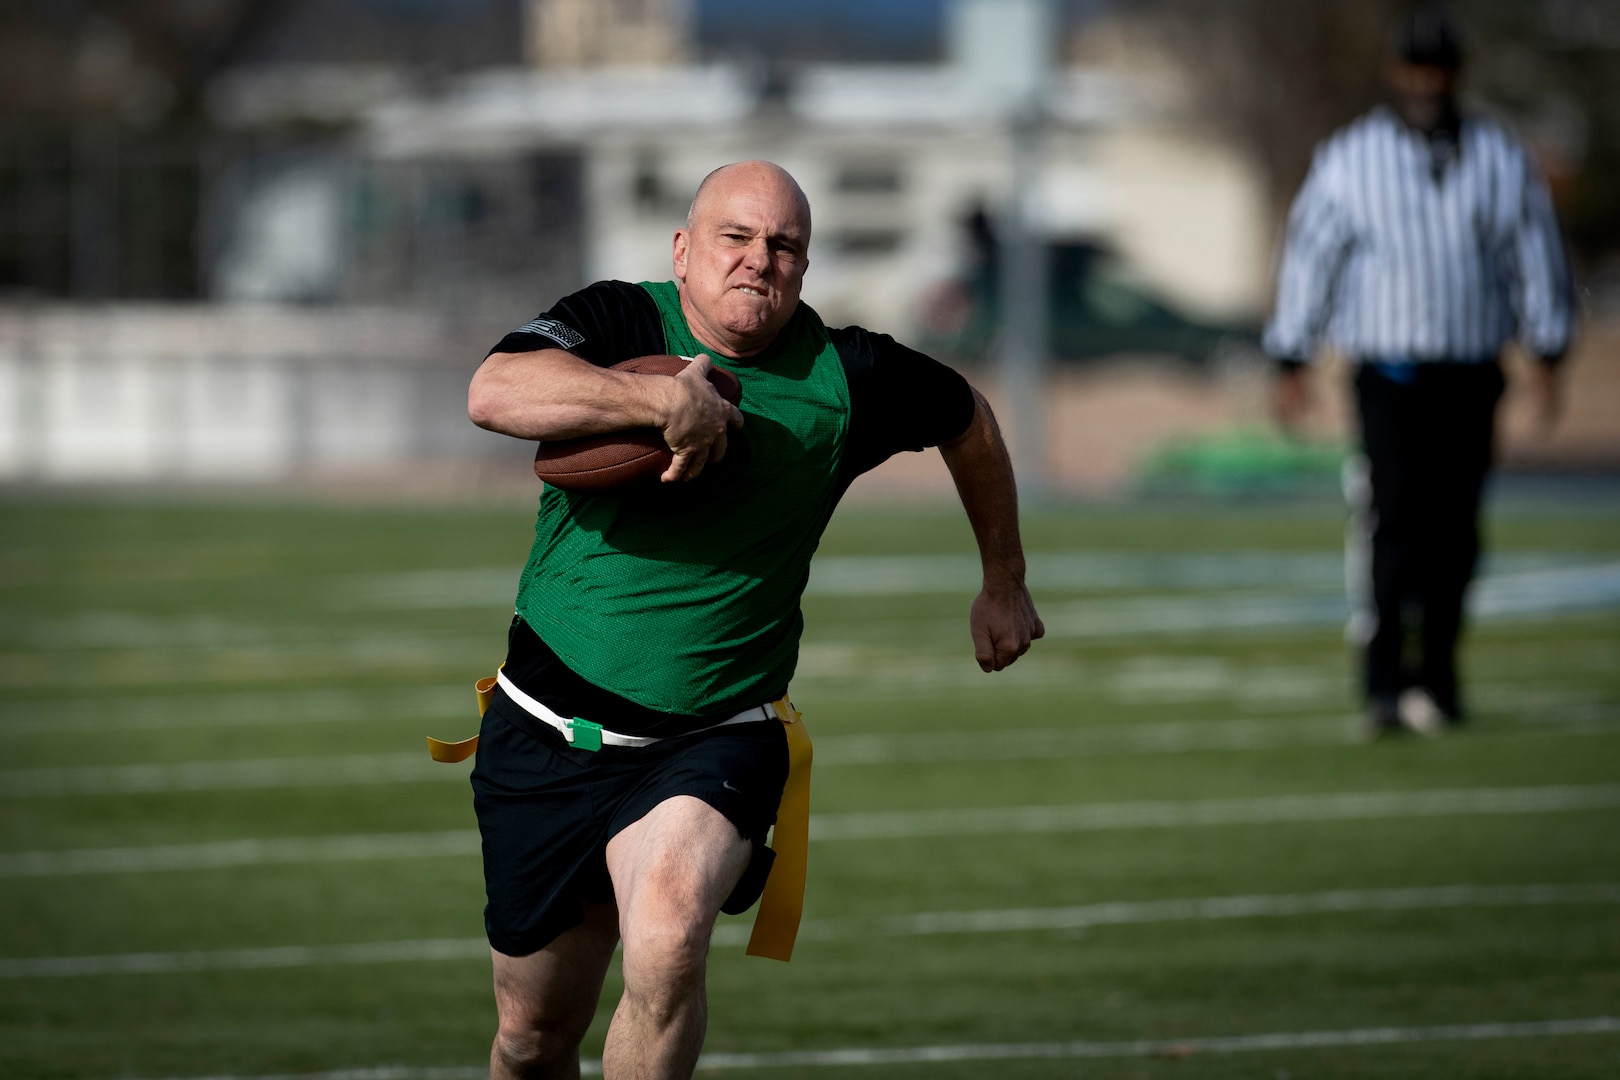 Man running while carrying football